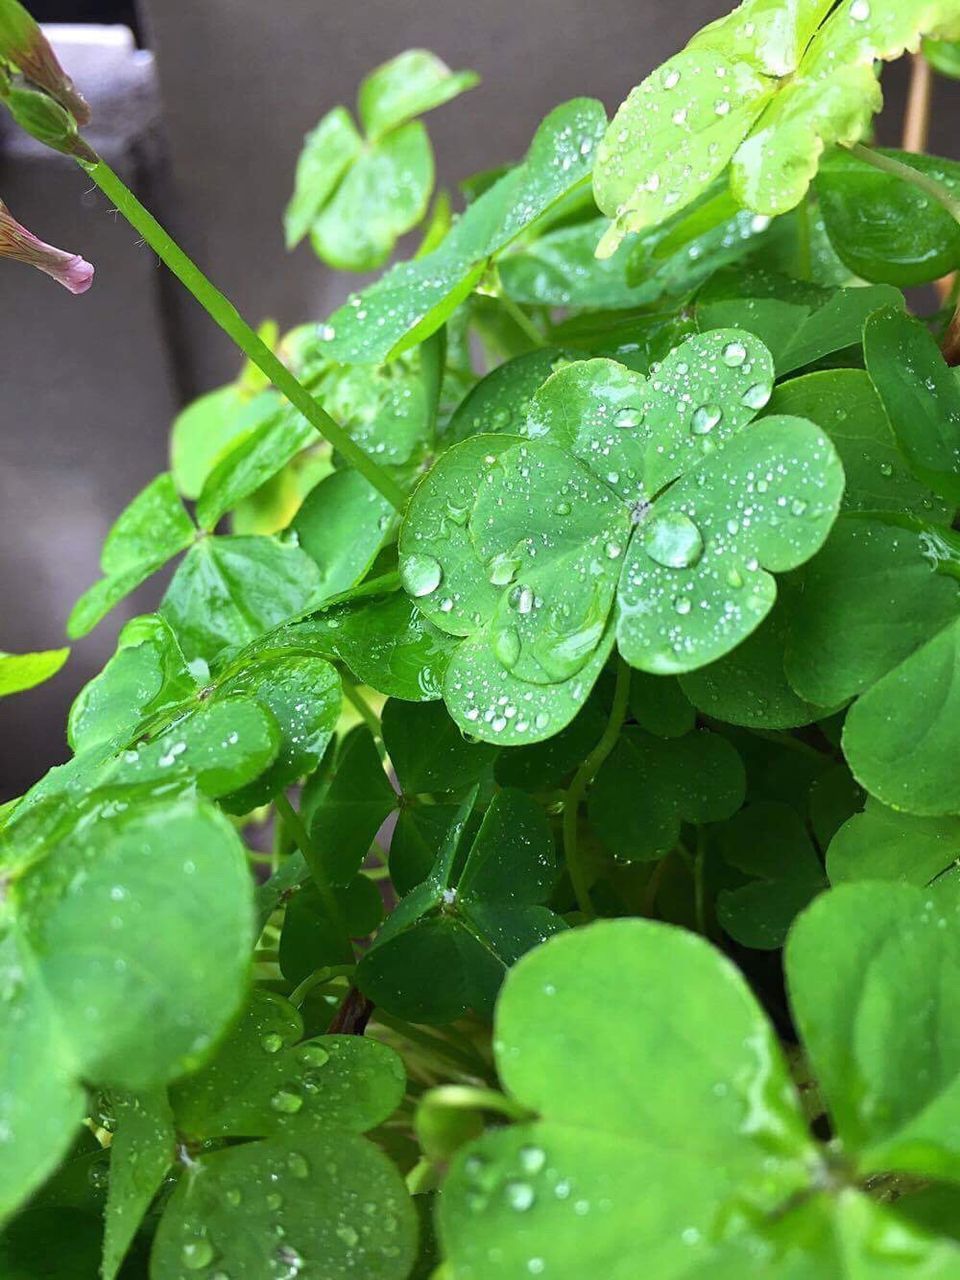 drop, wet, water, nature, leaf, growth, rain, dew, close-up, freshness, fragility, plant, focus on foreground, beauty in nature, raindrop, green color, no people, rainy season, outdoors, day, purity